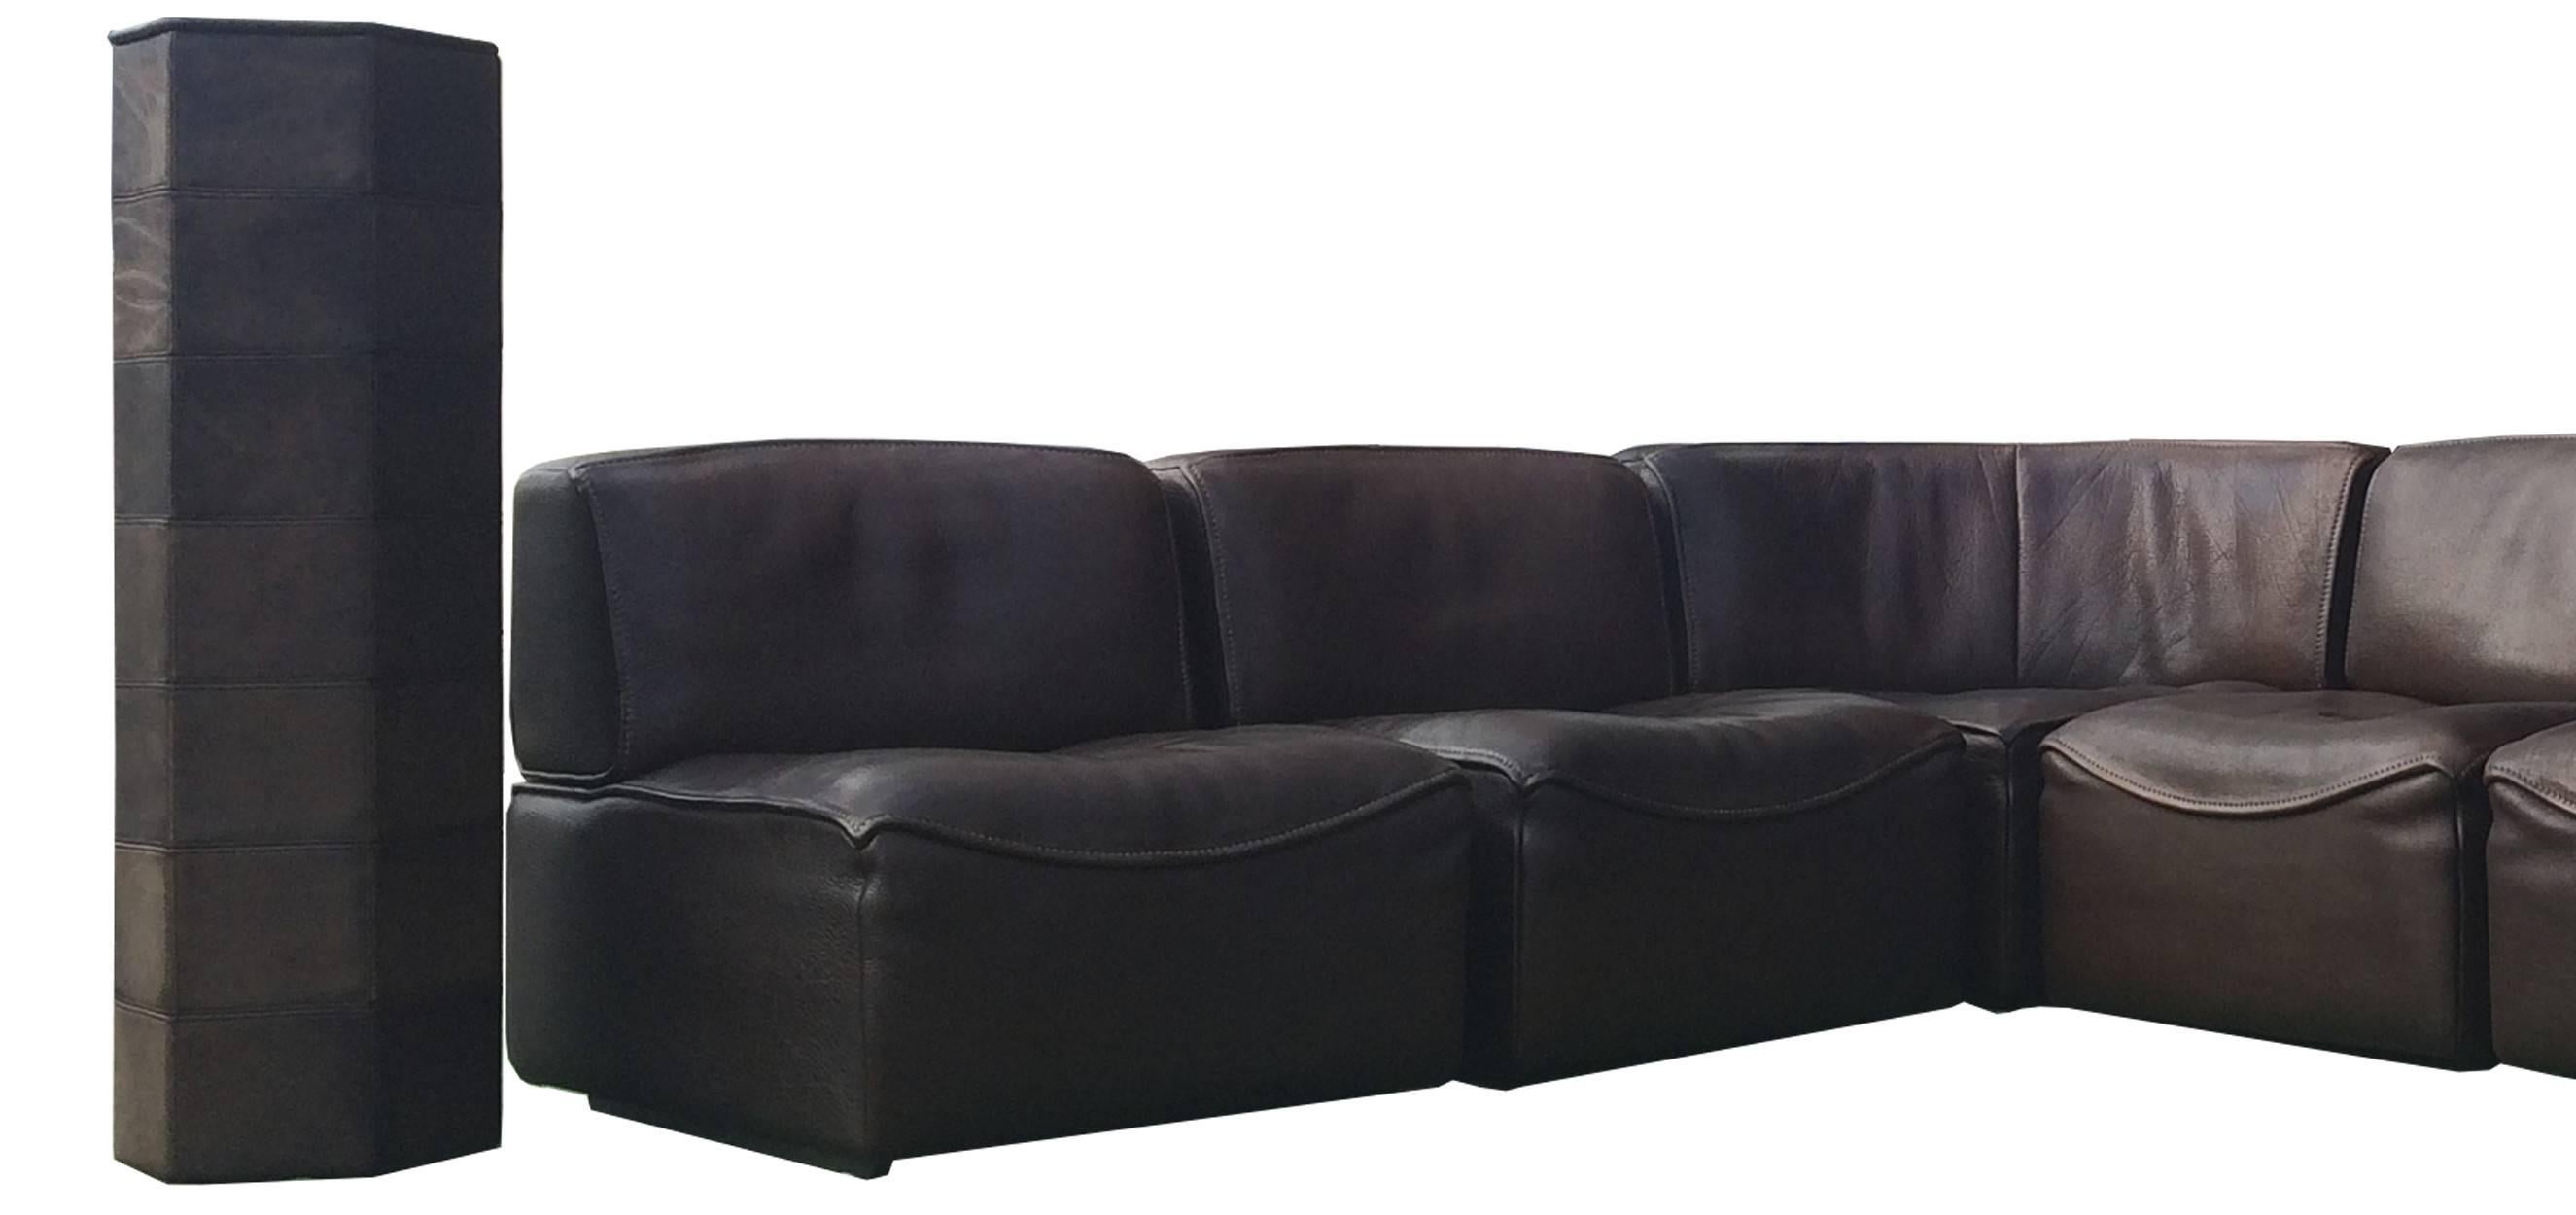 De Sede DS 15 modular neck leather sofa with six elements. Produced and designed by the Swiss company De Sede in the 1970s. The sofa has many set-up possibilities. You can make a corner sofa, two separate sofa’s or an easy chair separately, with